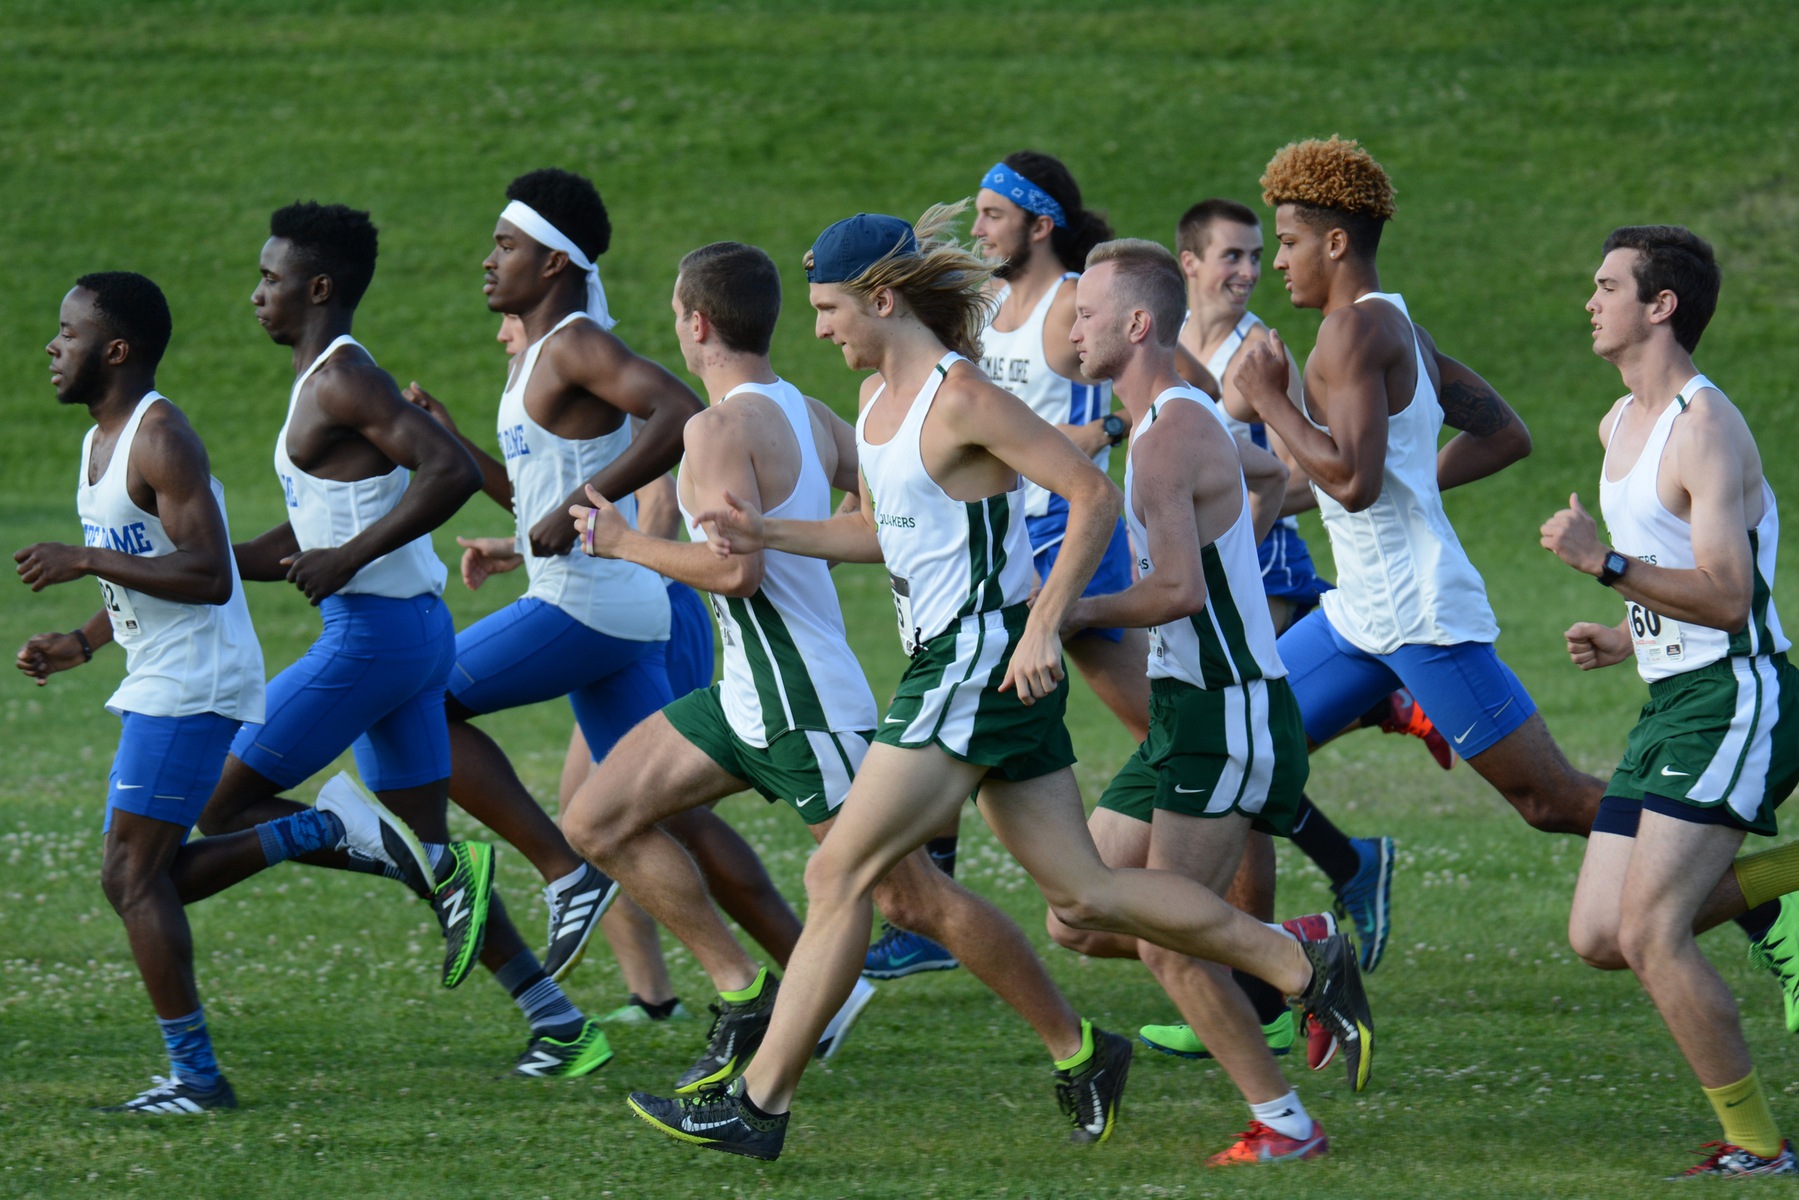 Men’s Cross Country Eighth at OAC Championships